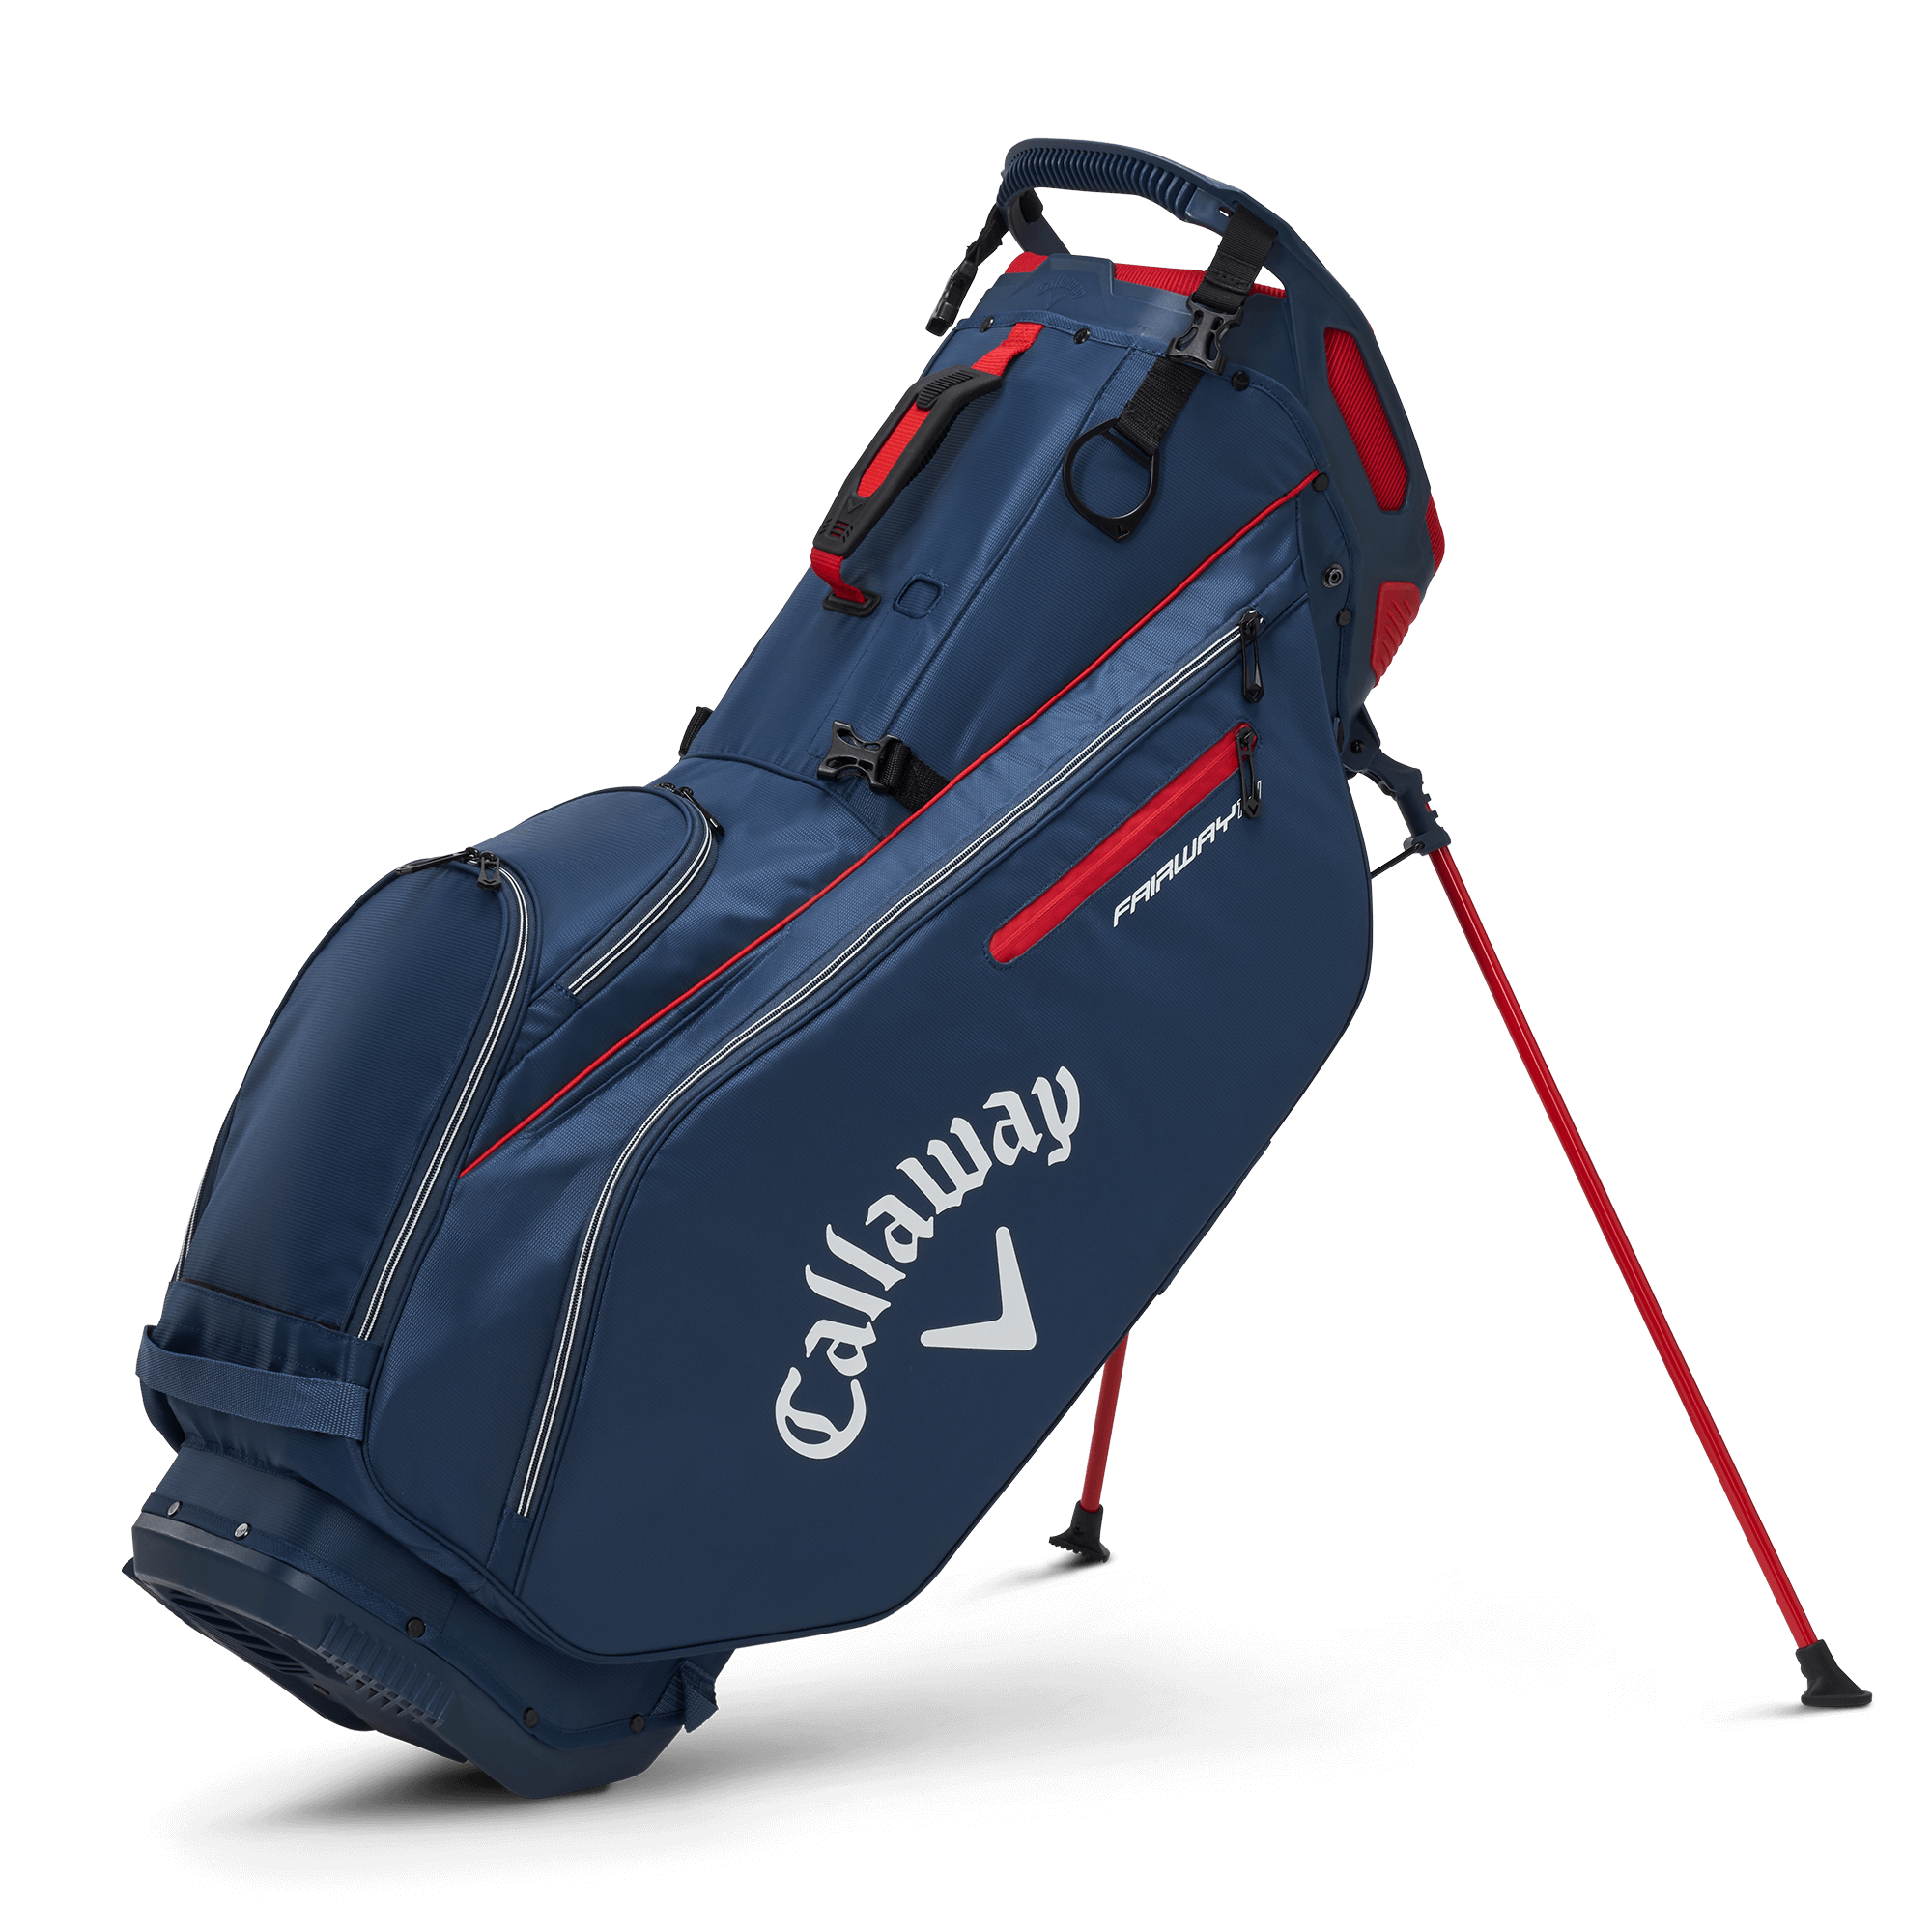 Fairway 14 Stand Bag Callaway Golf Reviews and Videos